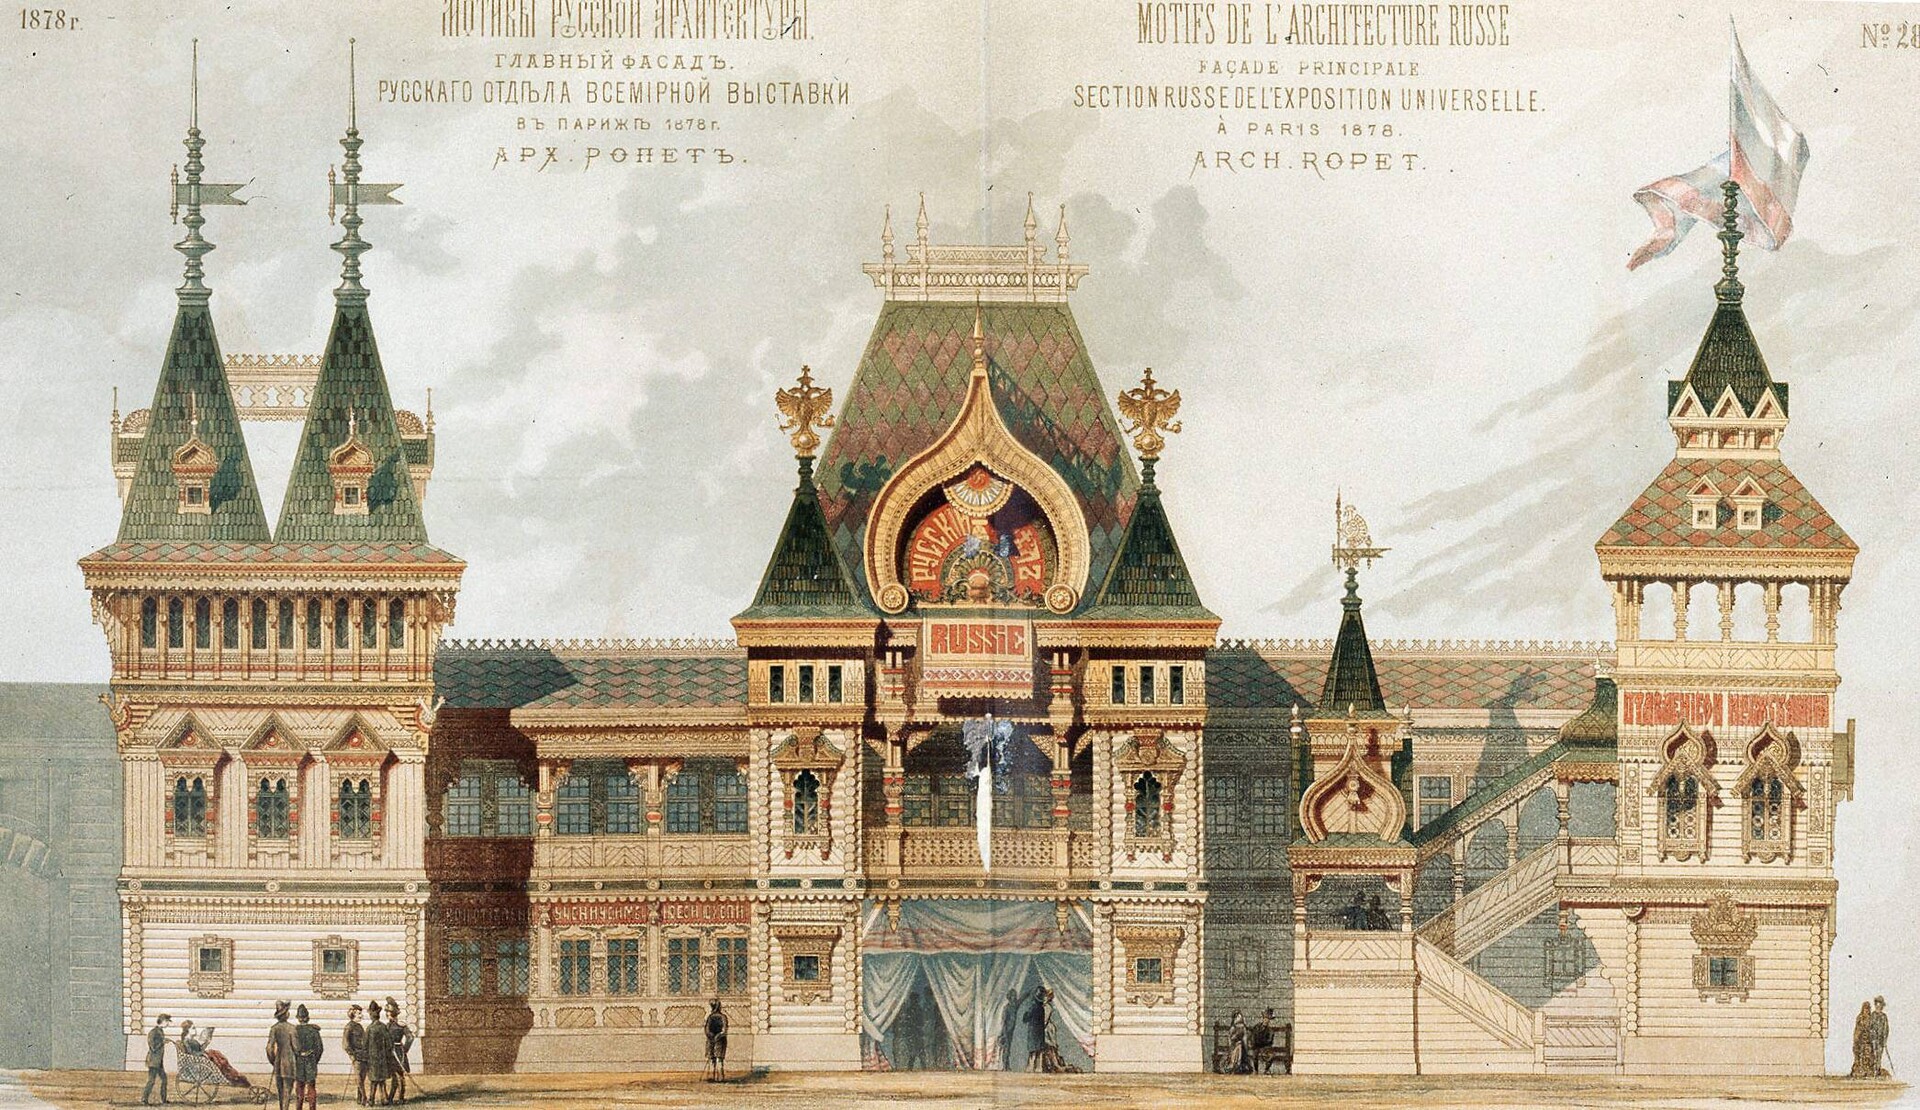 Sketch of the Ropet's pavillion at the 1878 ‘World Expo’ in Paris